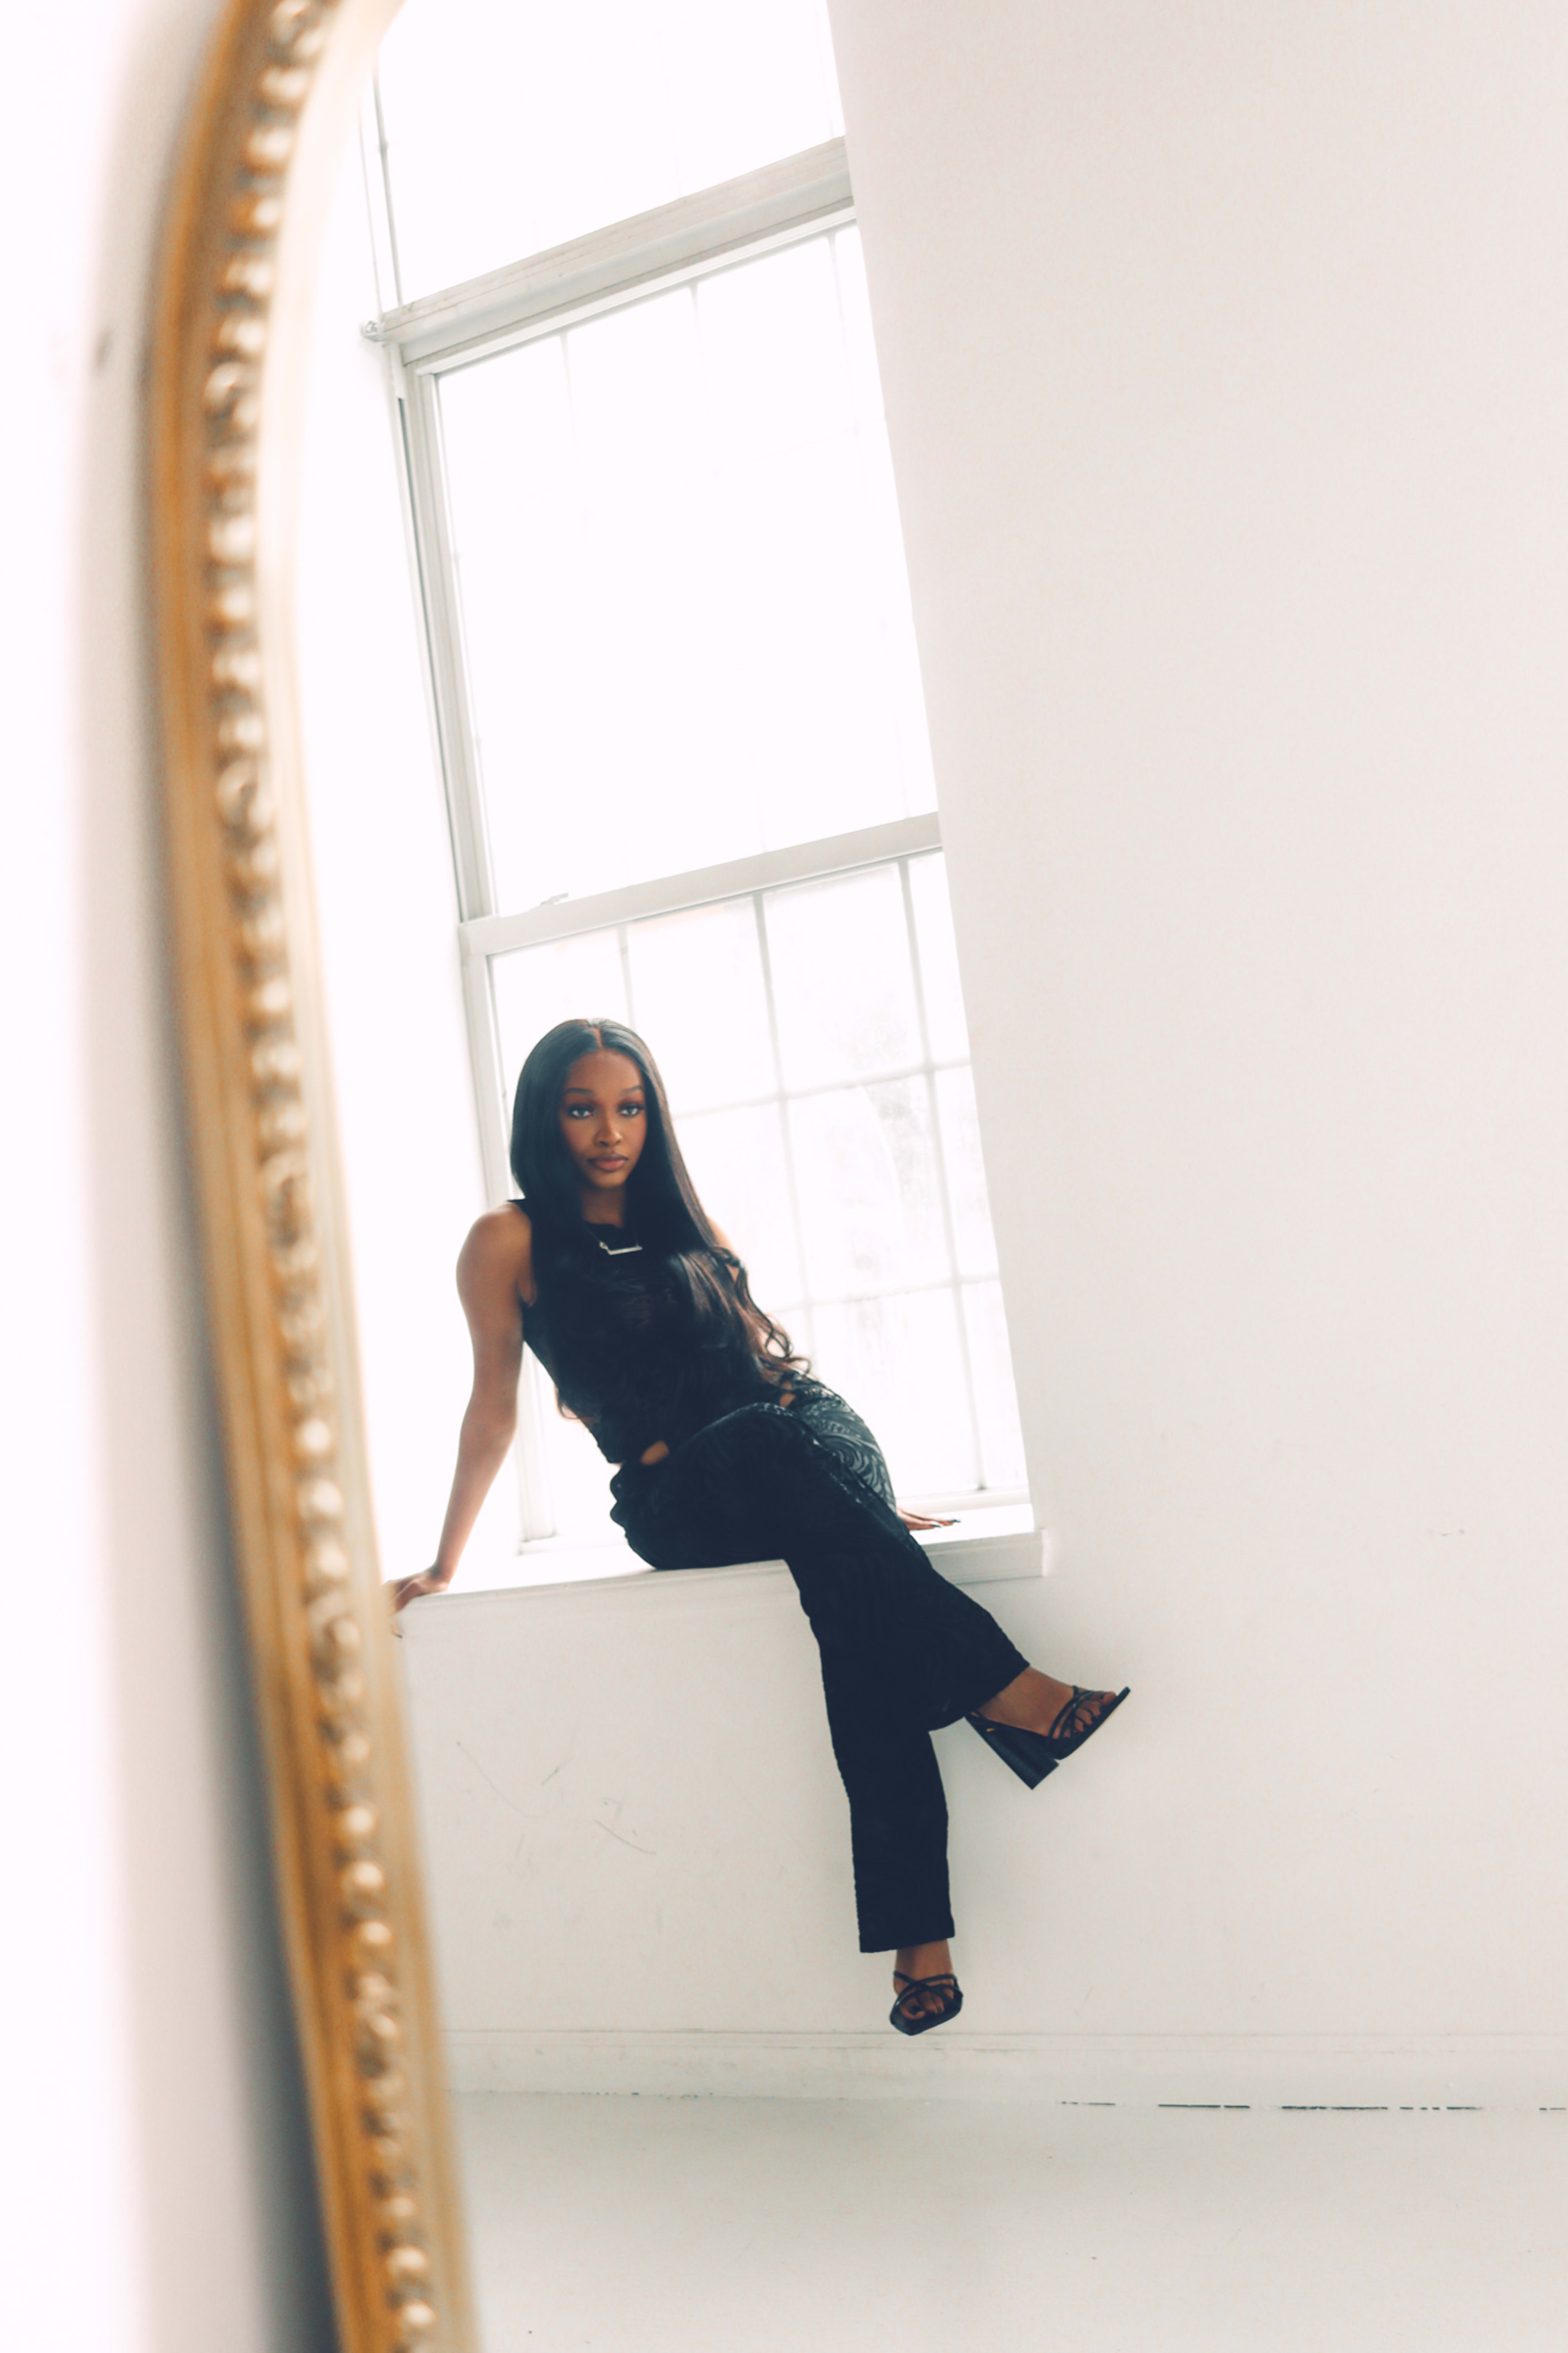 A minimalist photo shoot of a woman sitting on a black ledge in front of a white mirror.